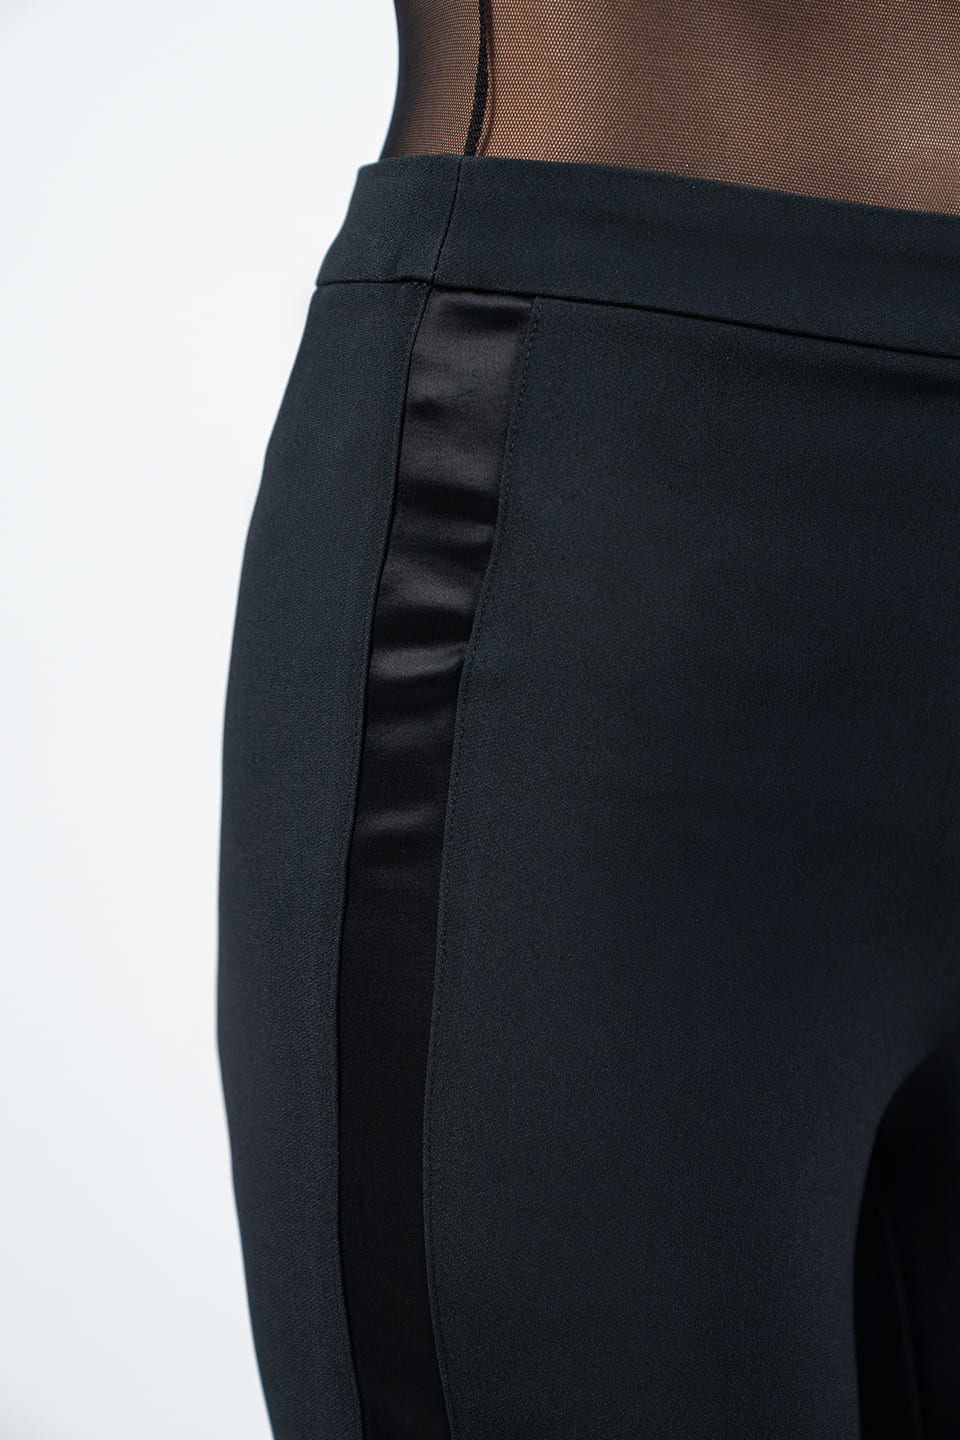 Thumbnail for Product gallery 2, Black Satin-Trim Trouser